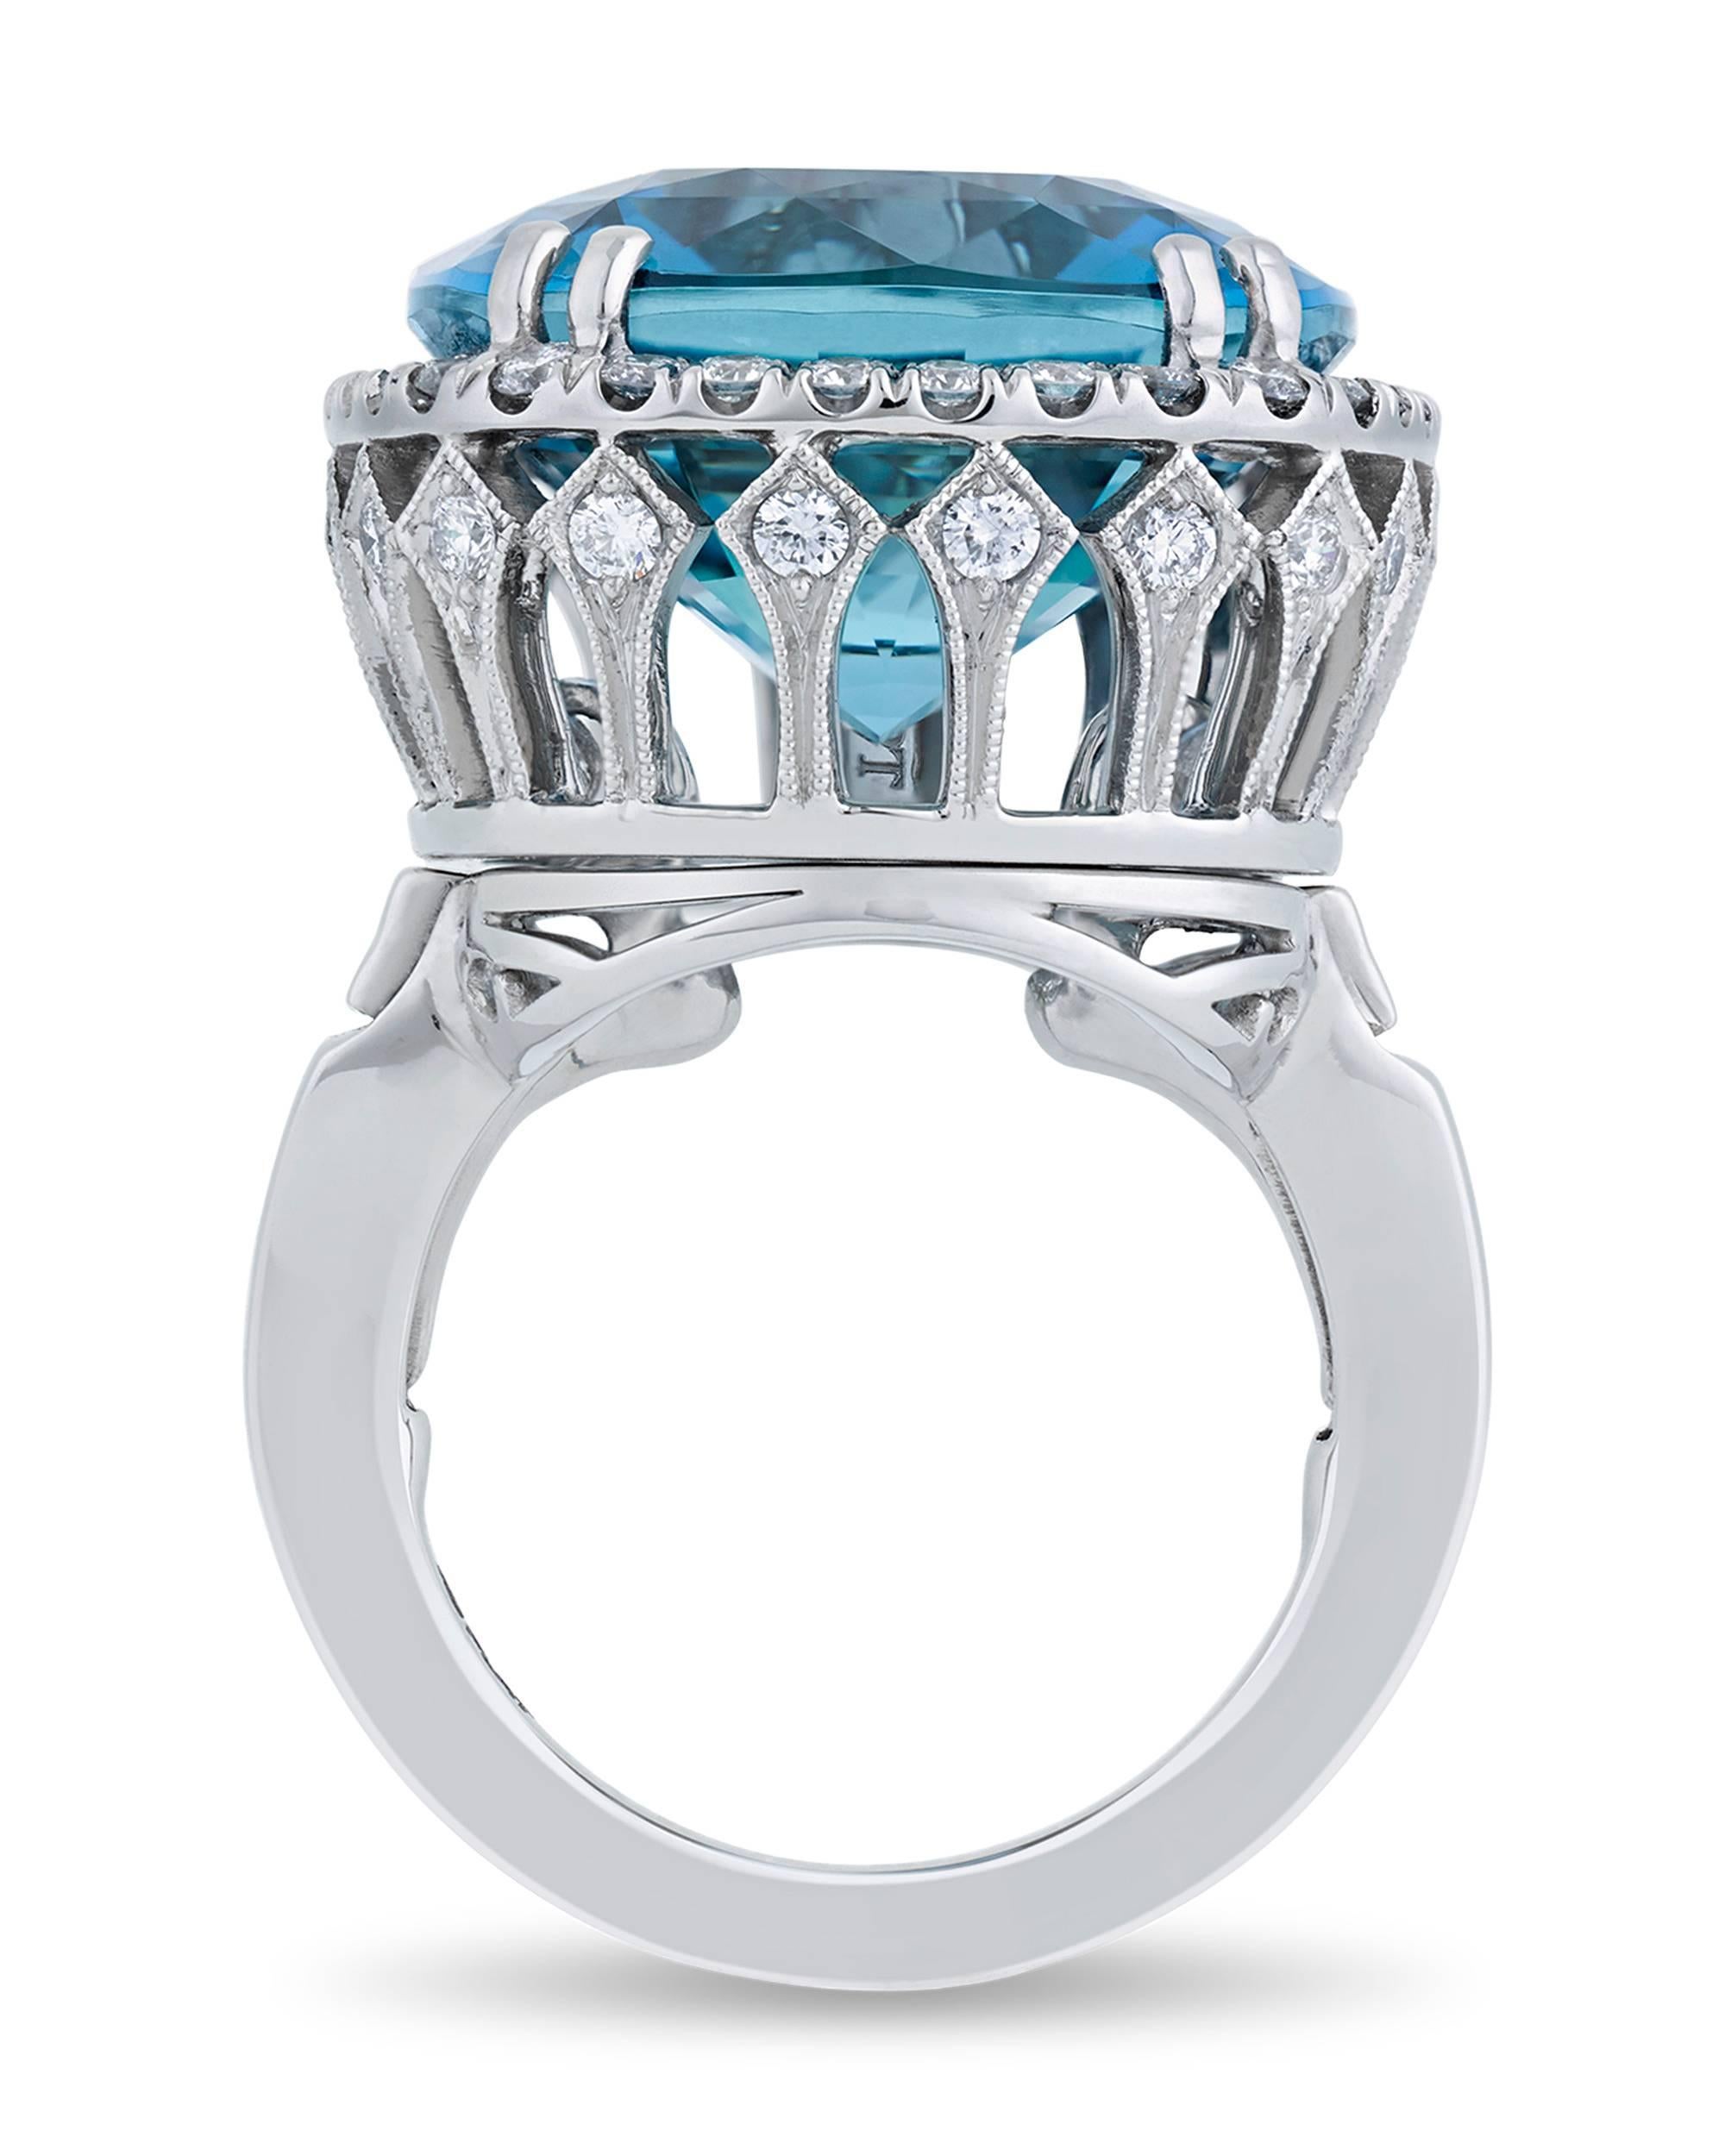 The incredible 22.22-carat aquamarine set in this ring captures attention with its vibrant aqua color. The cushion-cut gemstone possesses the deeply saturated Santa Maria blue hue that is found only in the rarest variety of these stones. Named in